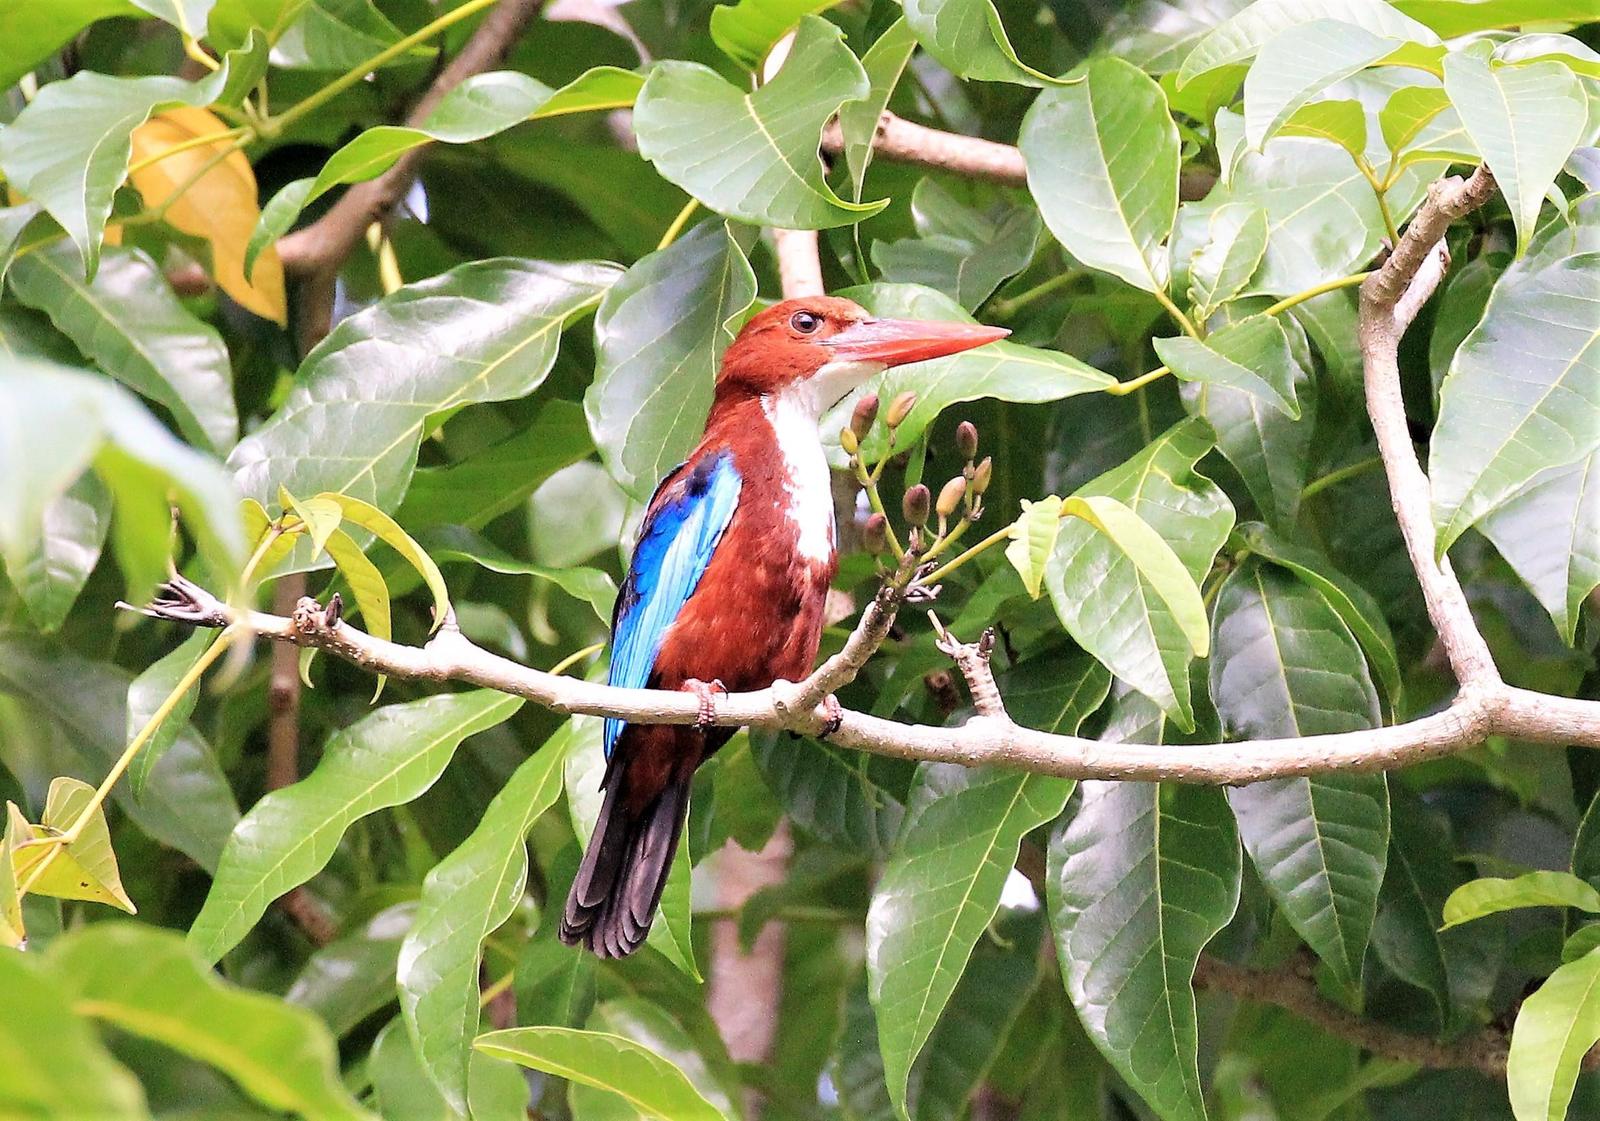 White-throated Kingfisher Photo by Steven Cheong